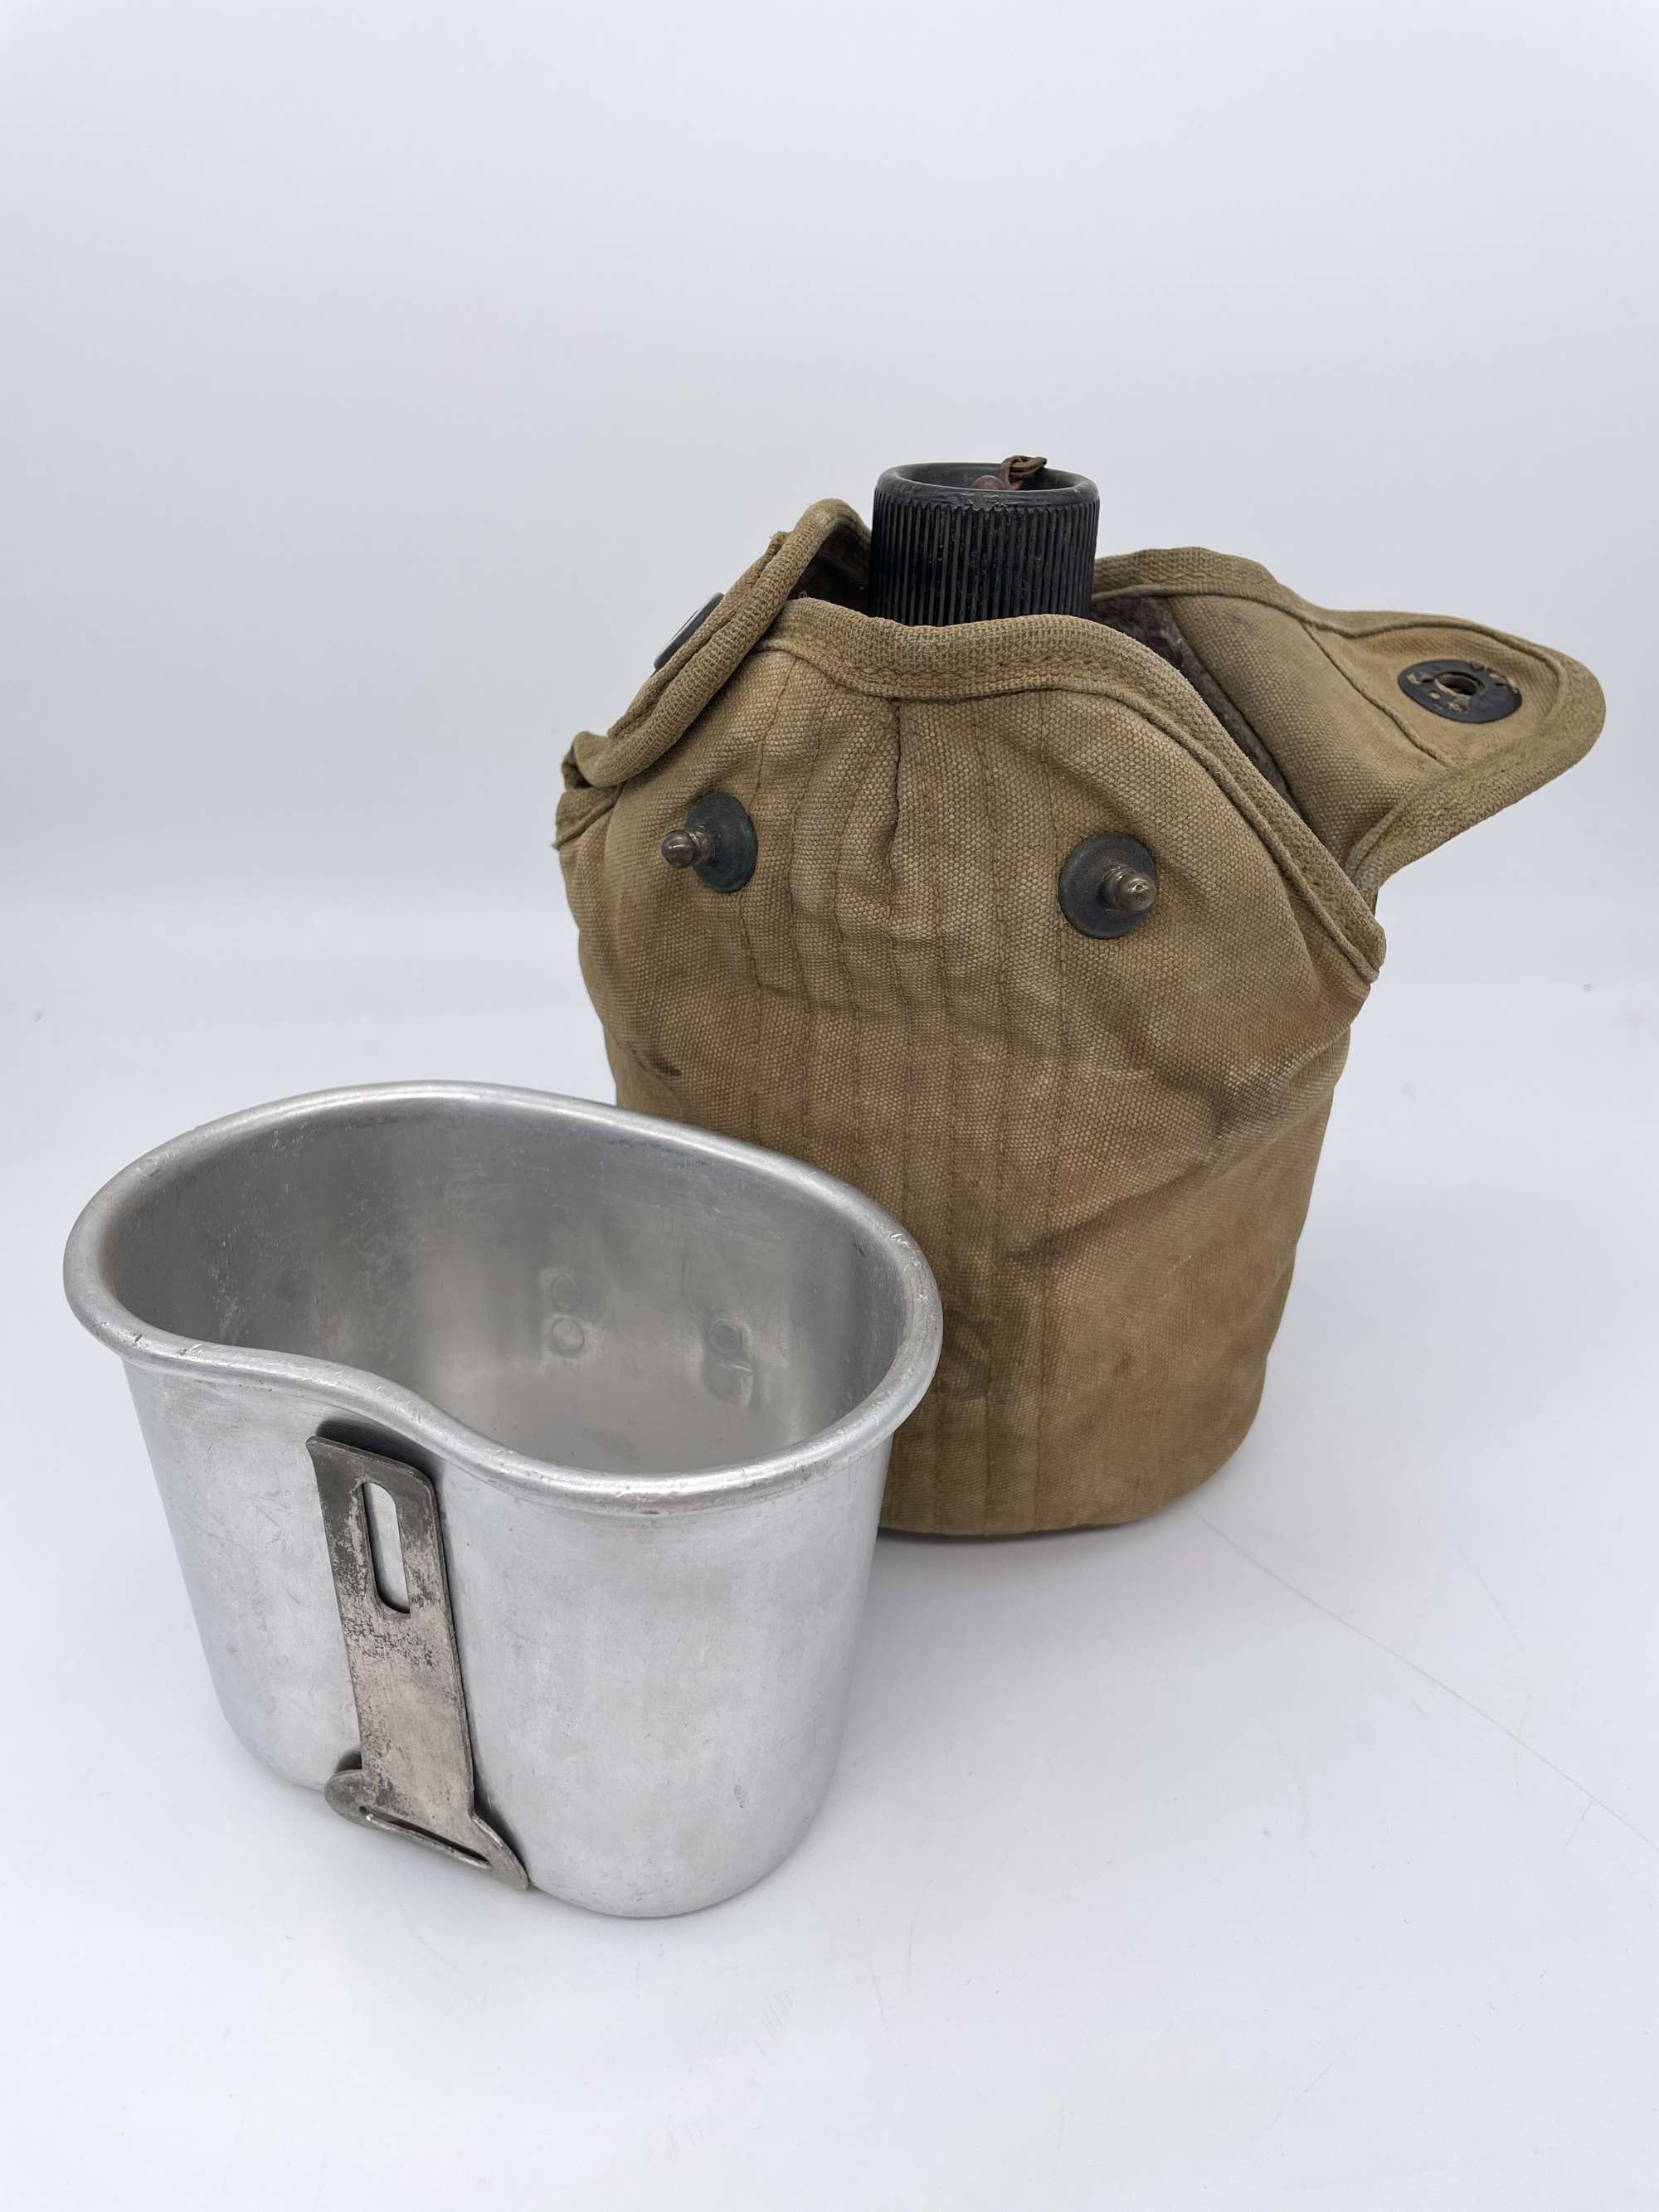 Original World War Two Era American Canteen, Cup and Cover